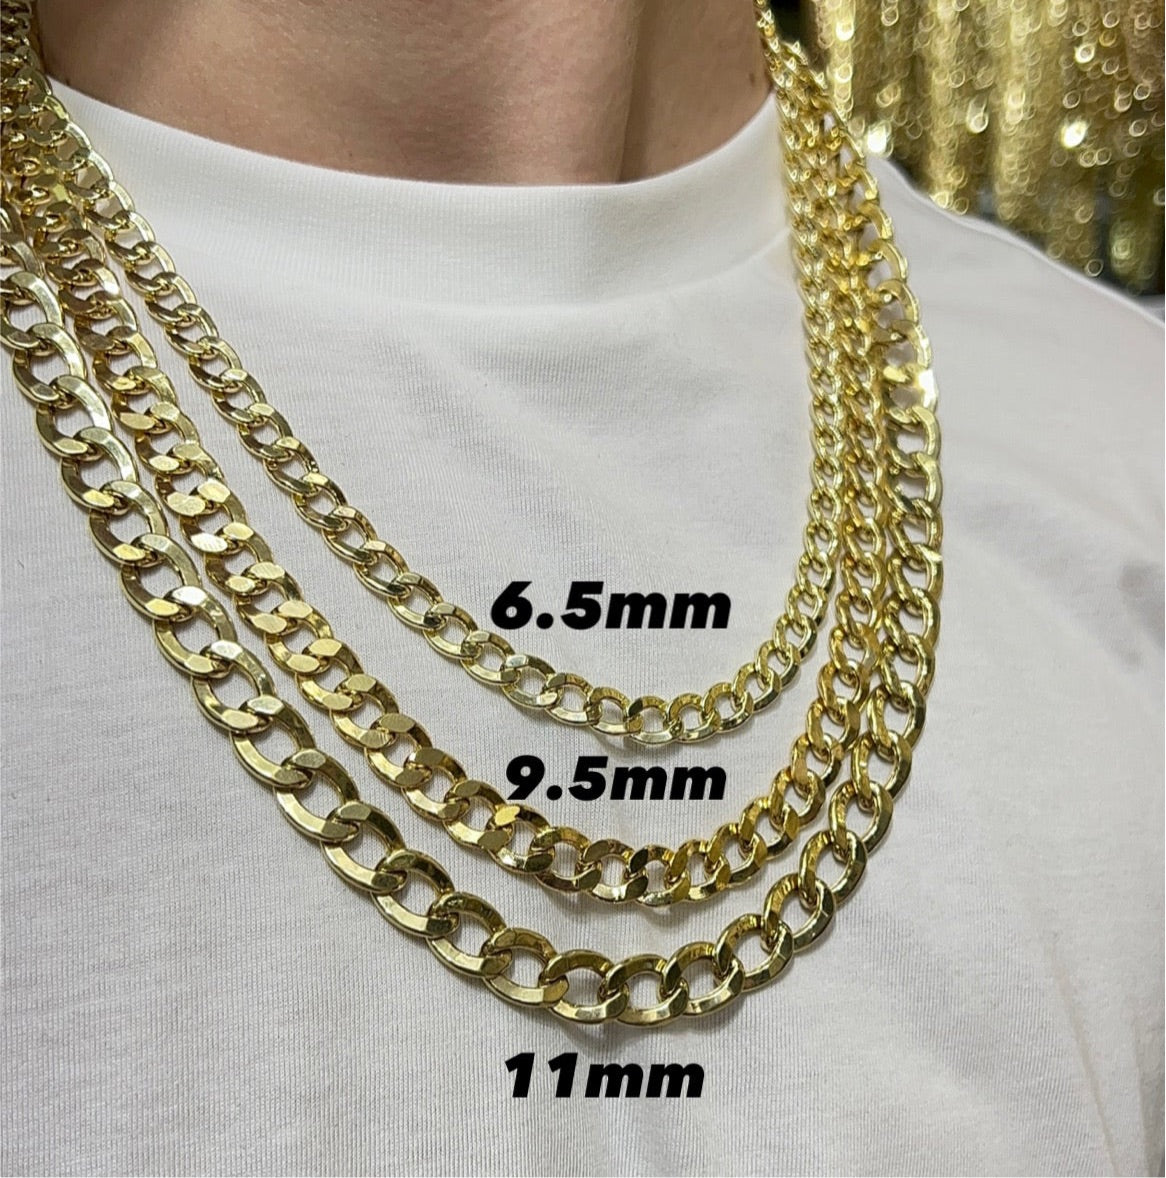 10k Gold Chain Solid curb link 2.5mm to 7.5mm 16 18 20 22 24 26 28 30 inch